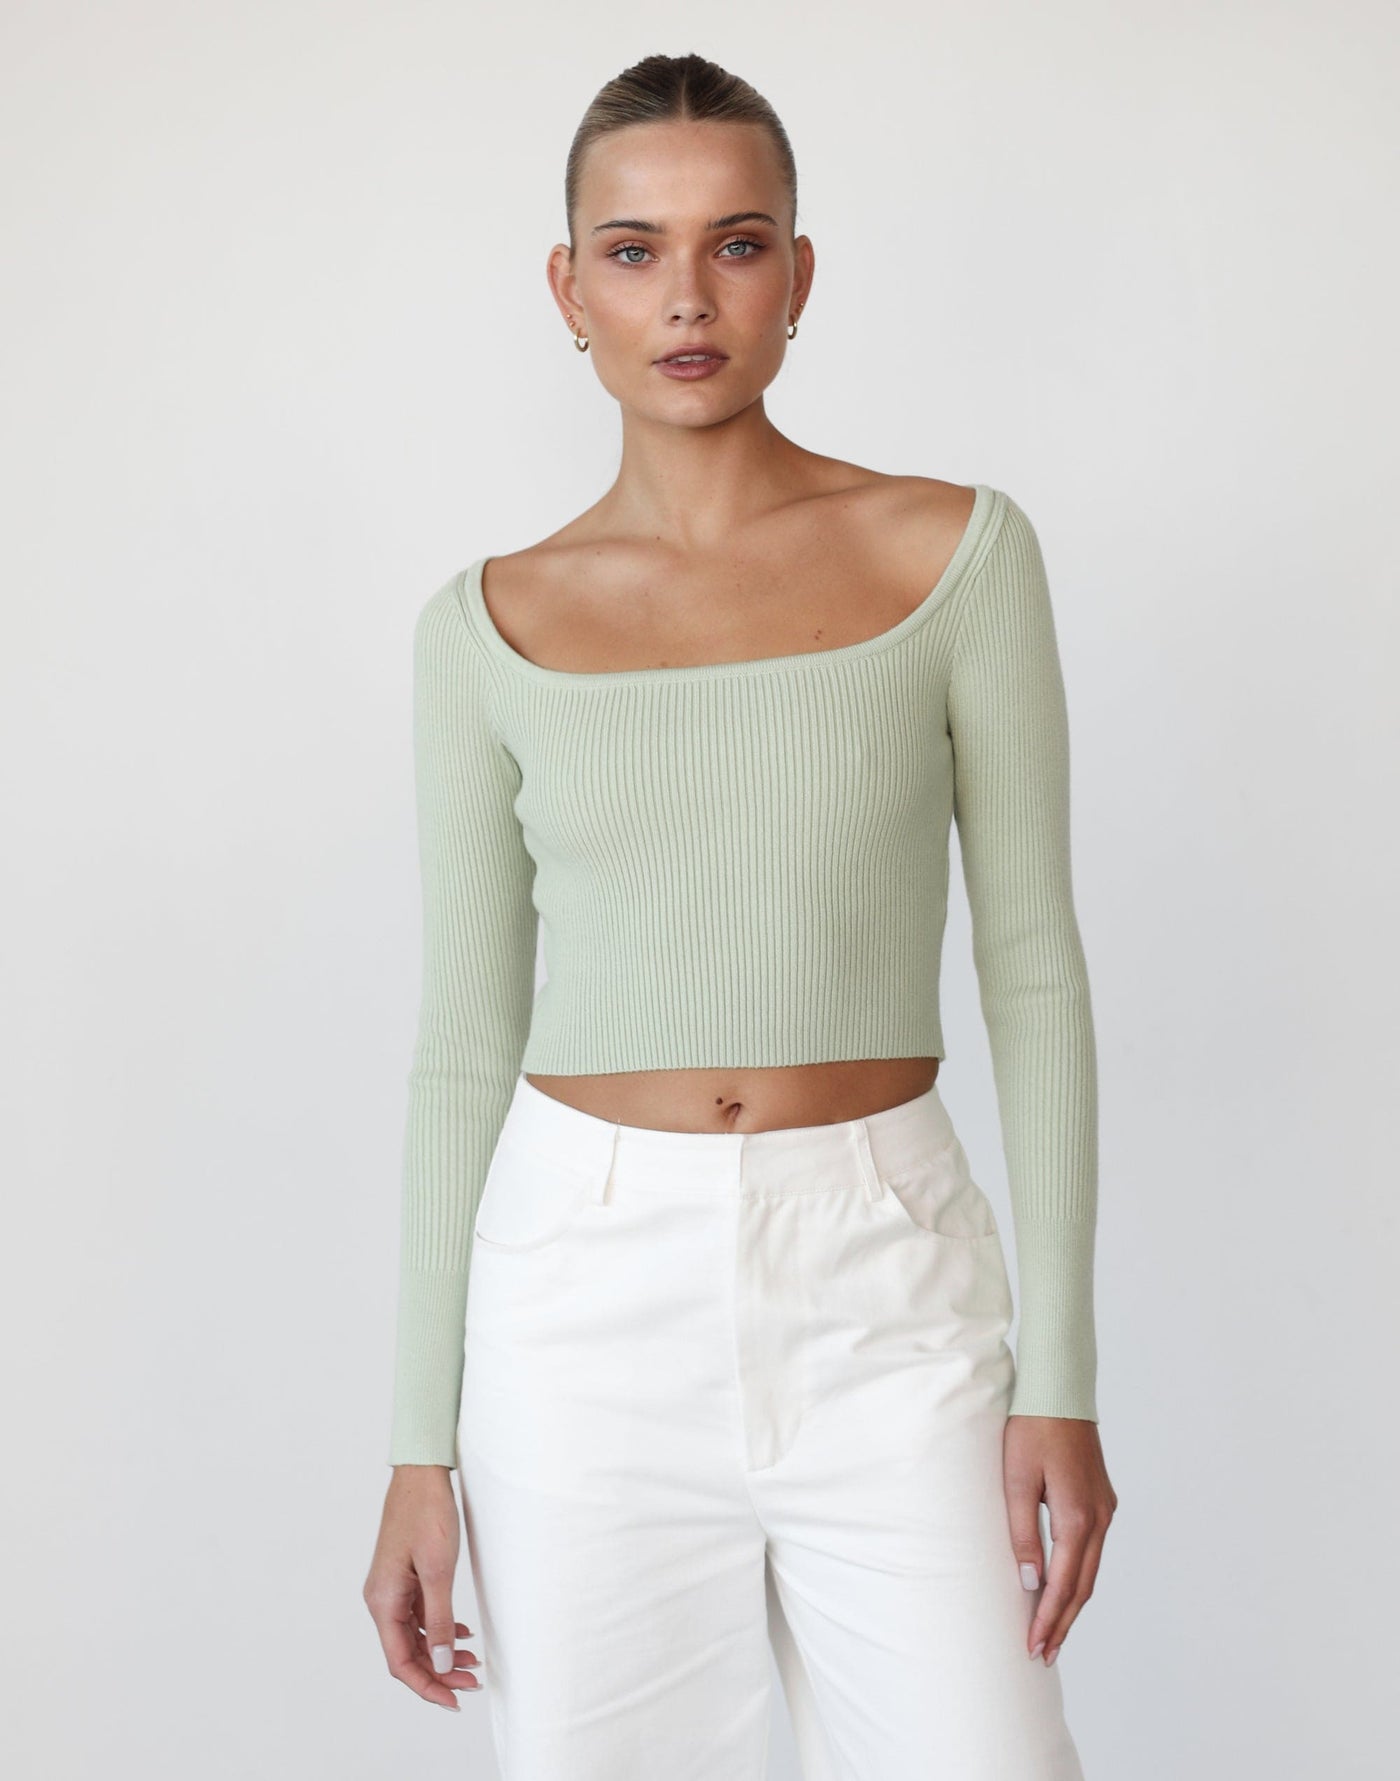 Self Control Knit Top (Sage) - Long Sleeved Crop Top - Women's Top - Charcoal Clothing